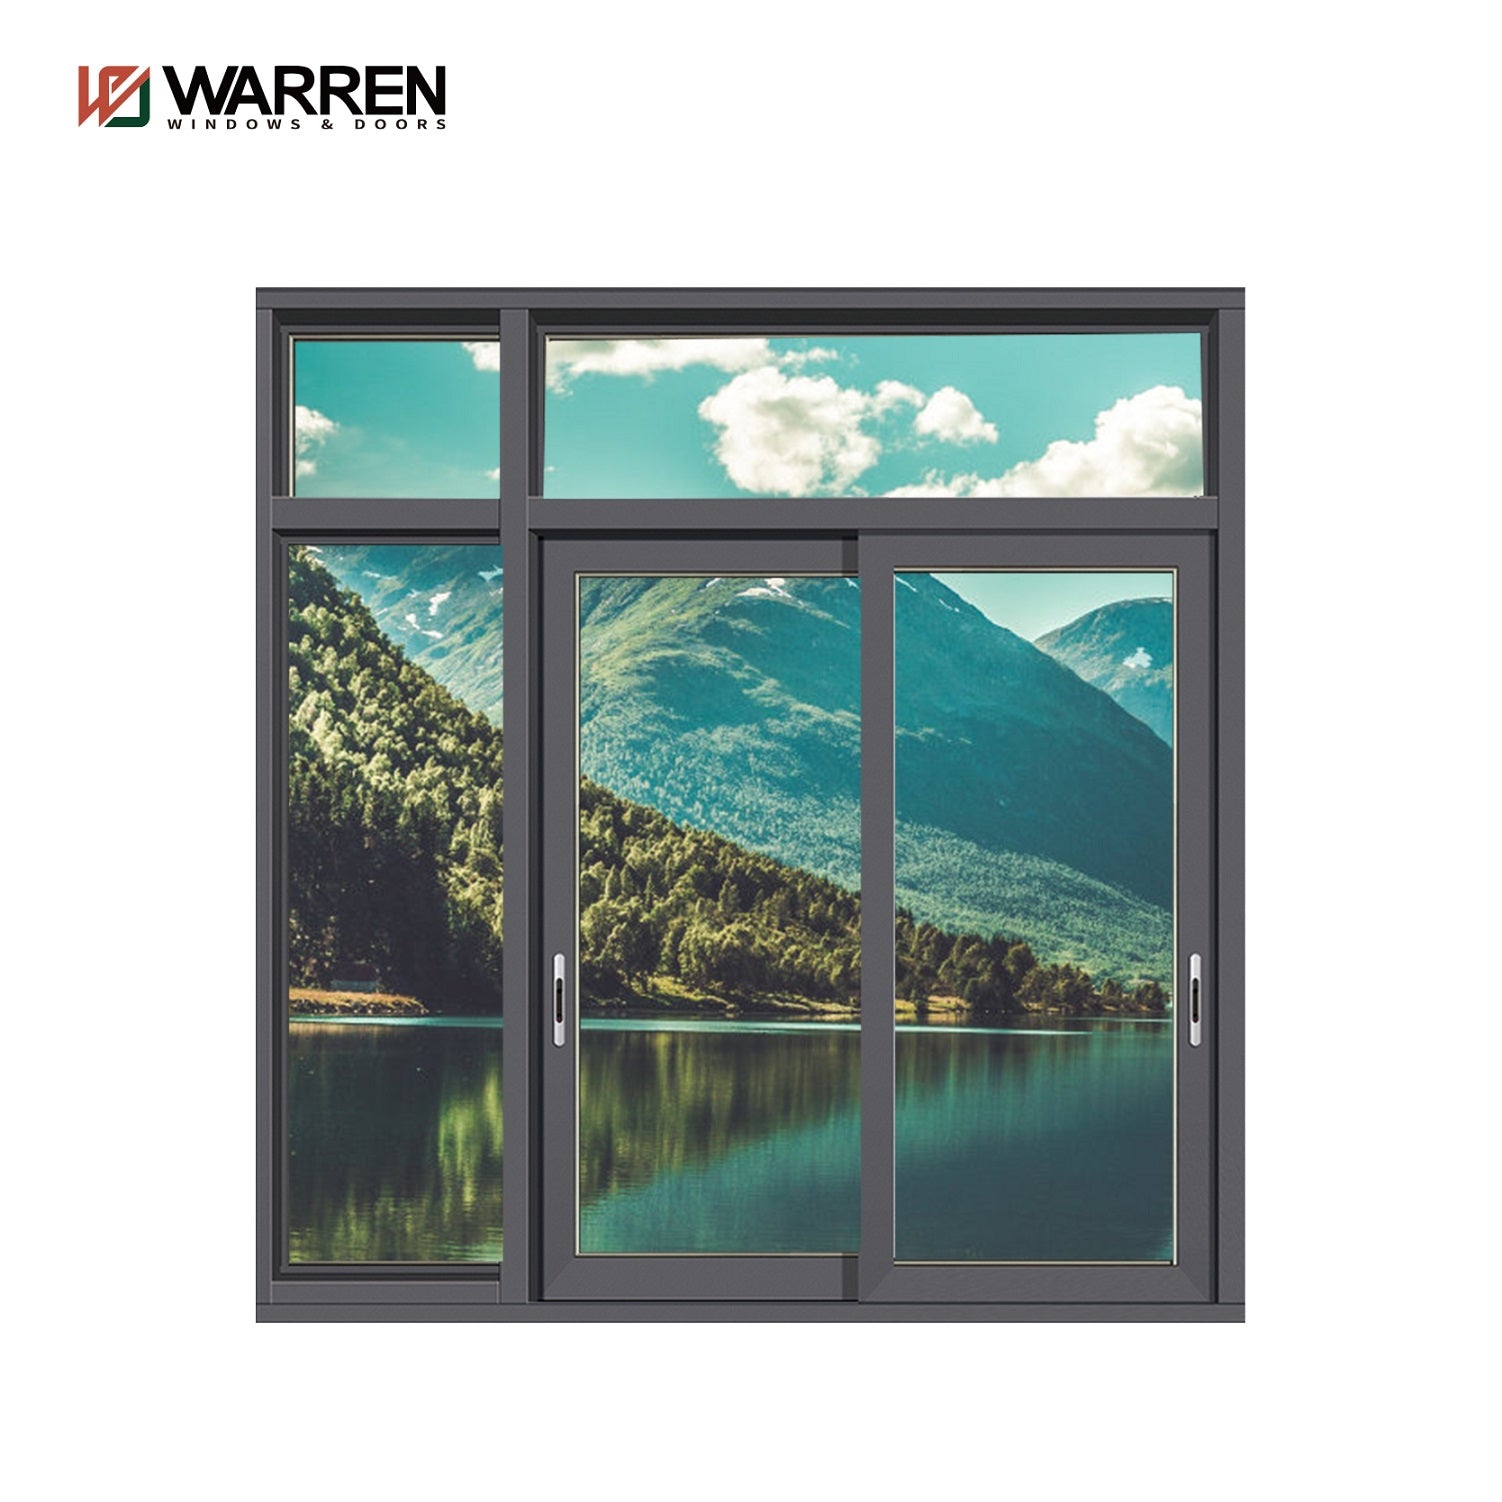 Warren Hot Sale Access Windows And Glass Aluminum Double Glazed Windows From China